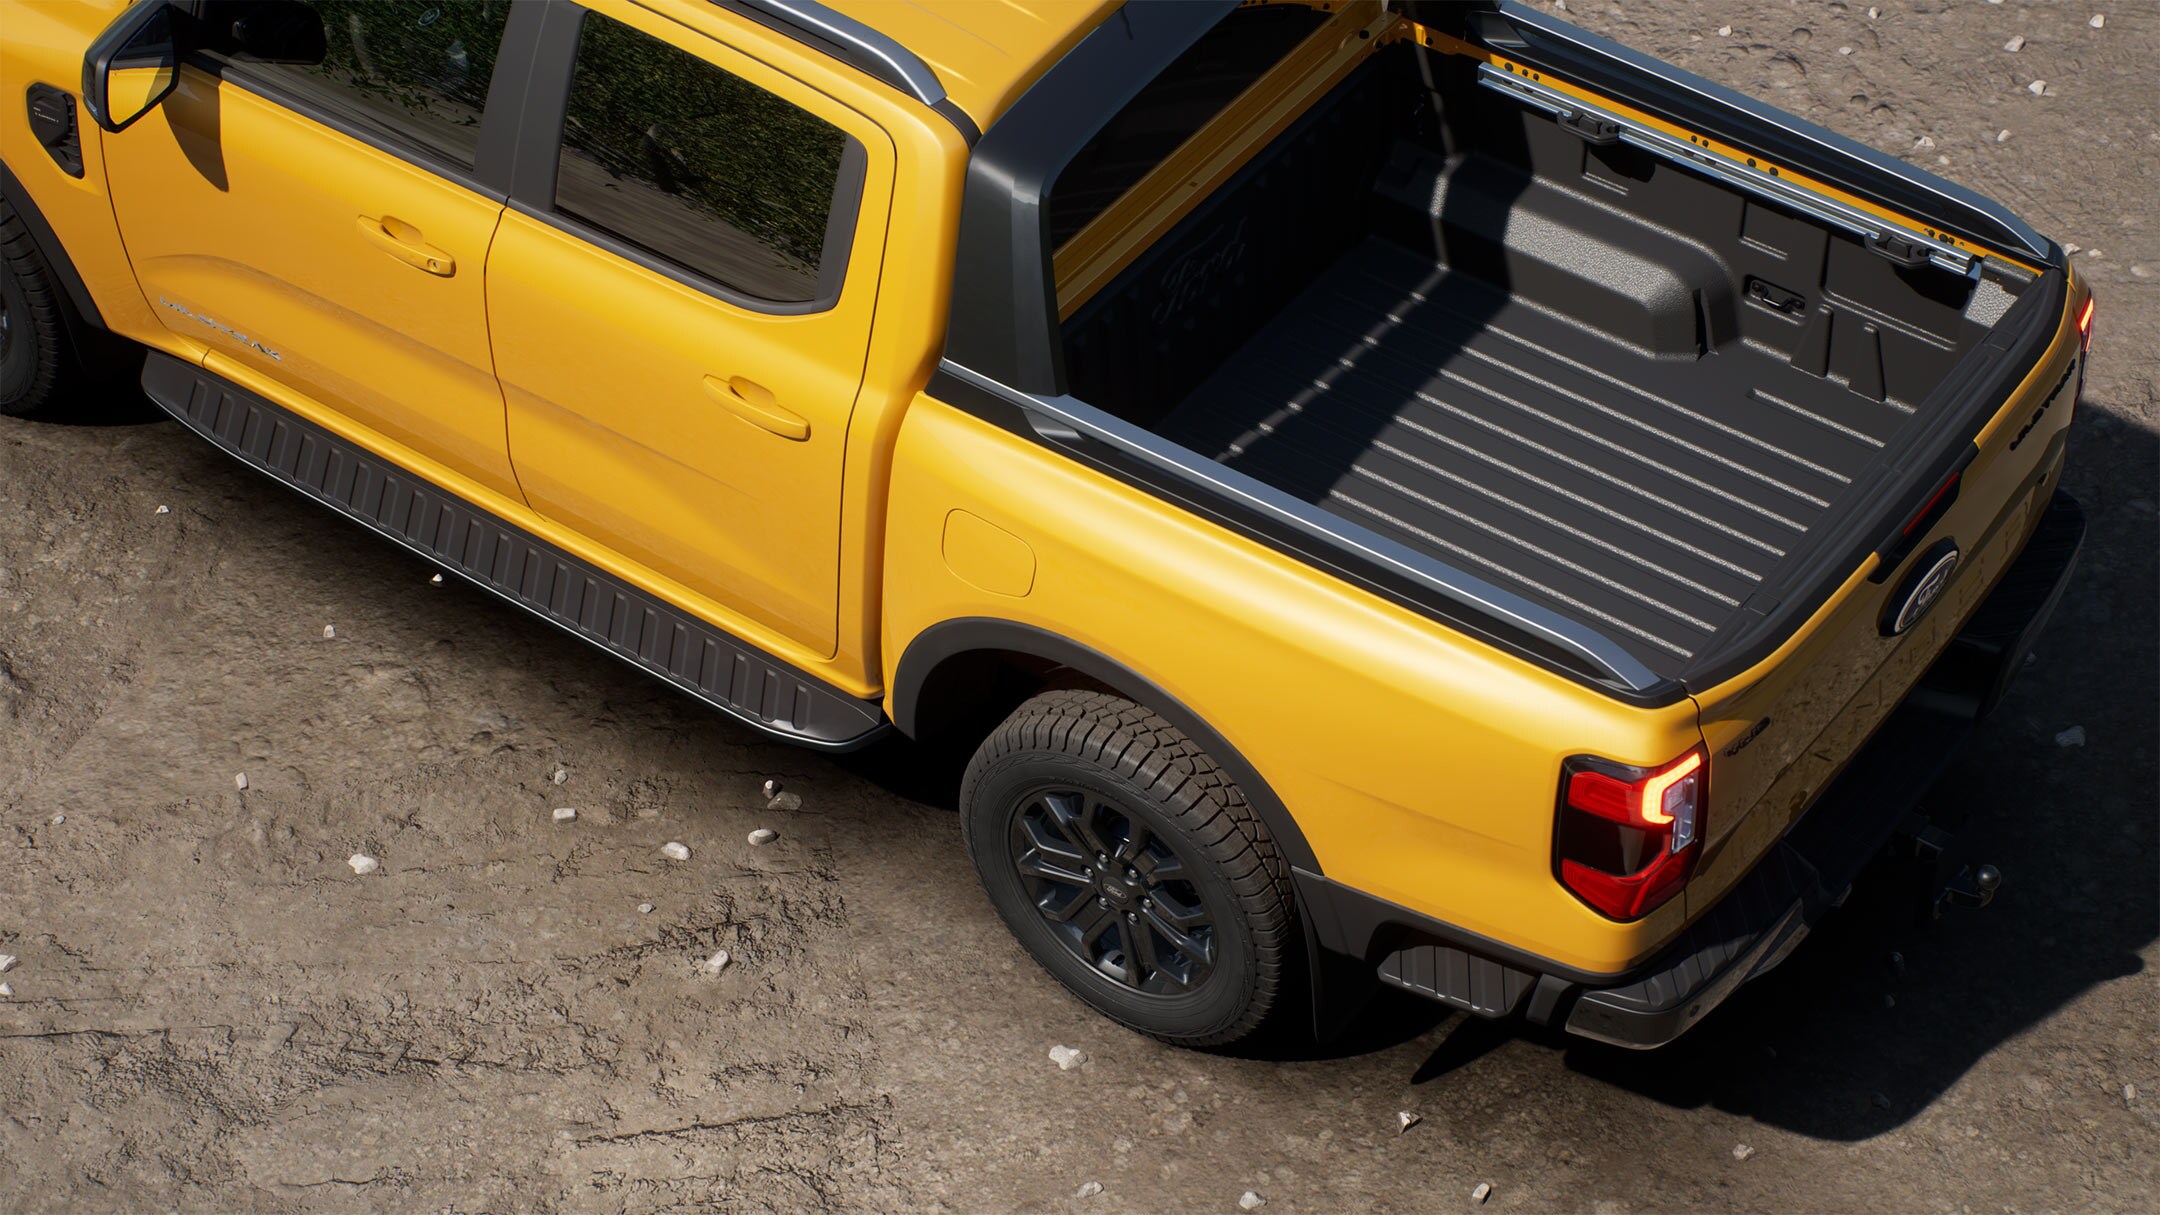 Ford Ranger Bed Capabilities Rear View